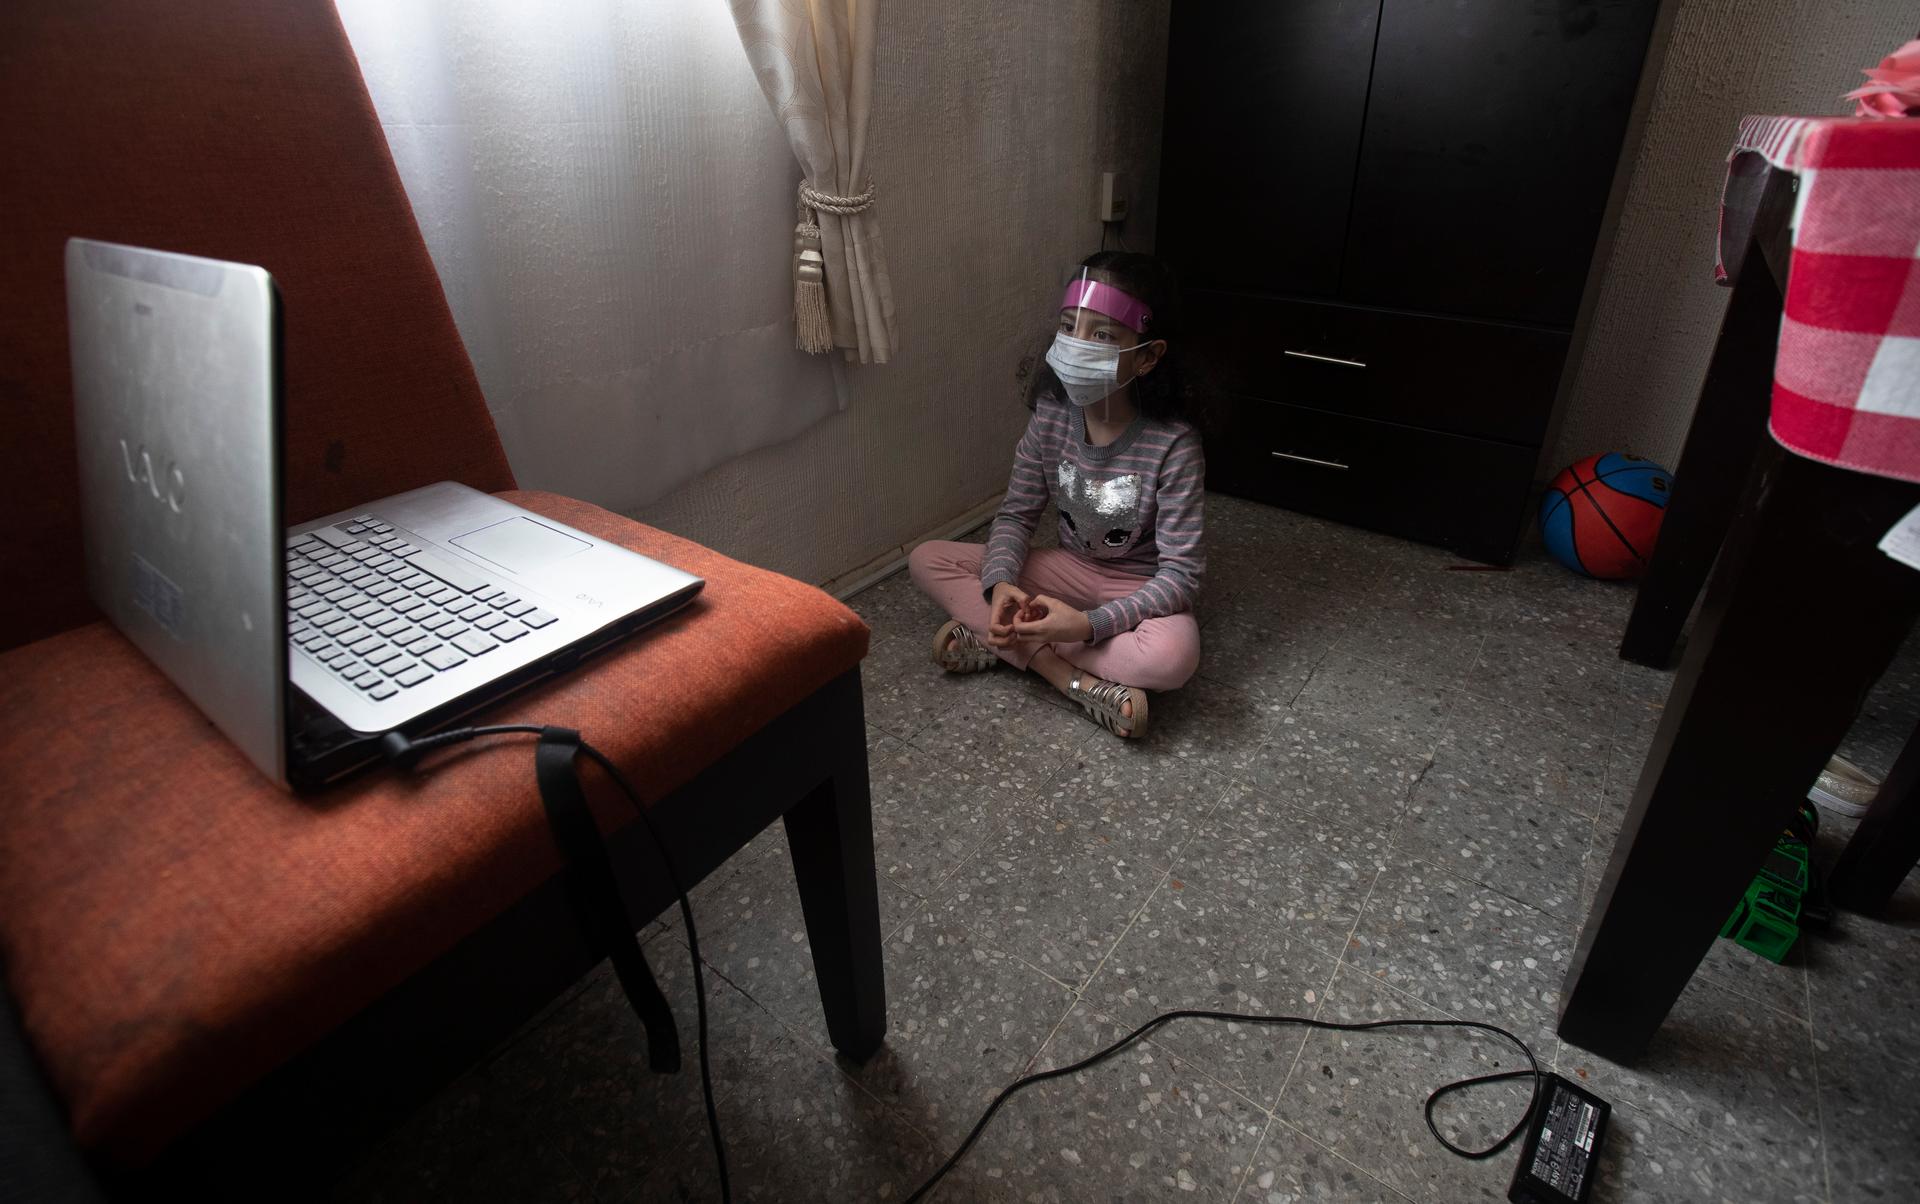 A girl wears a plastic guard indoors as she watches a laptop screen.